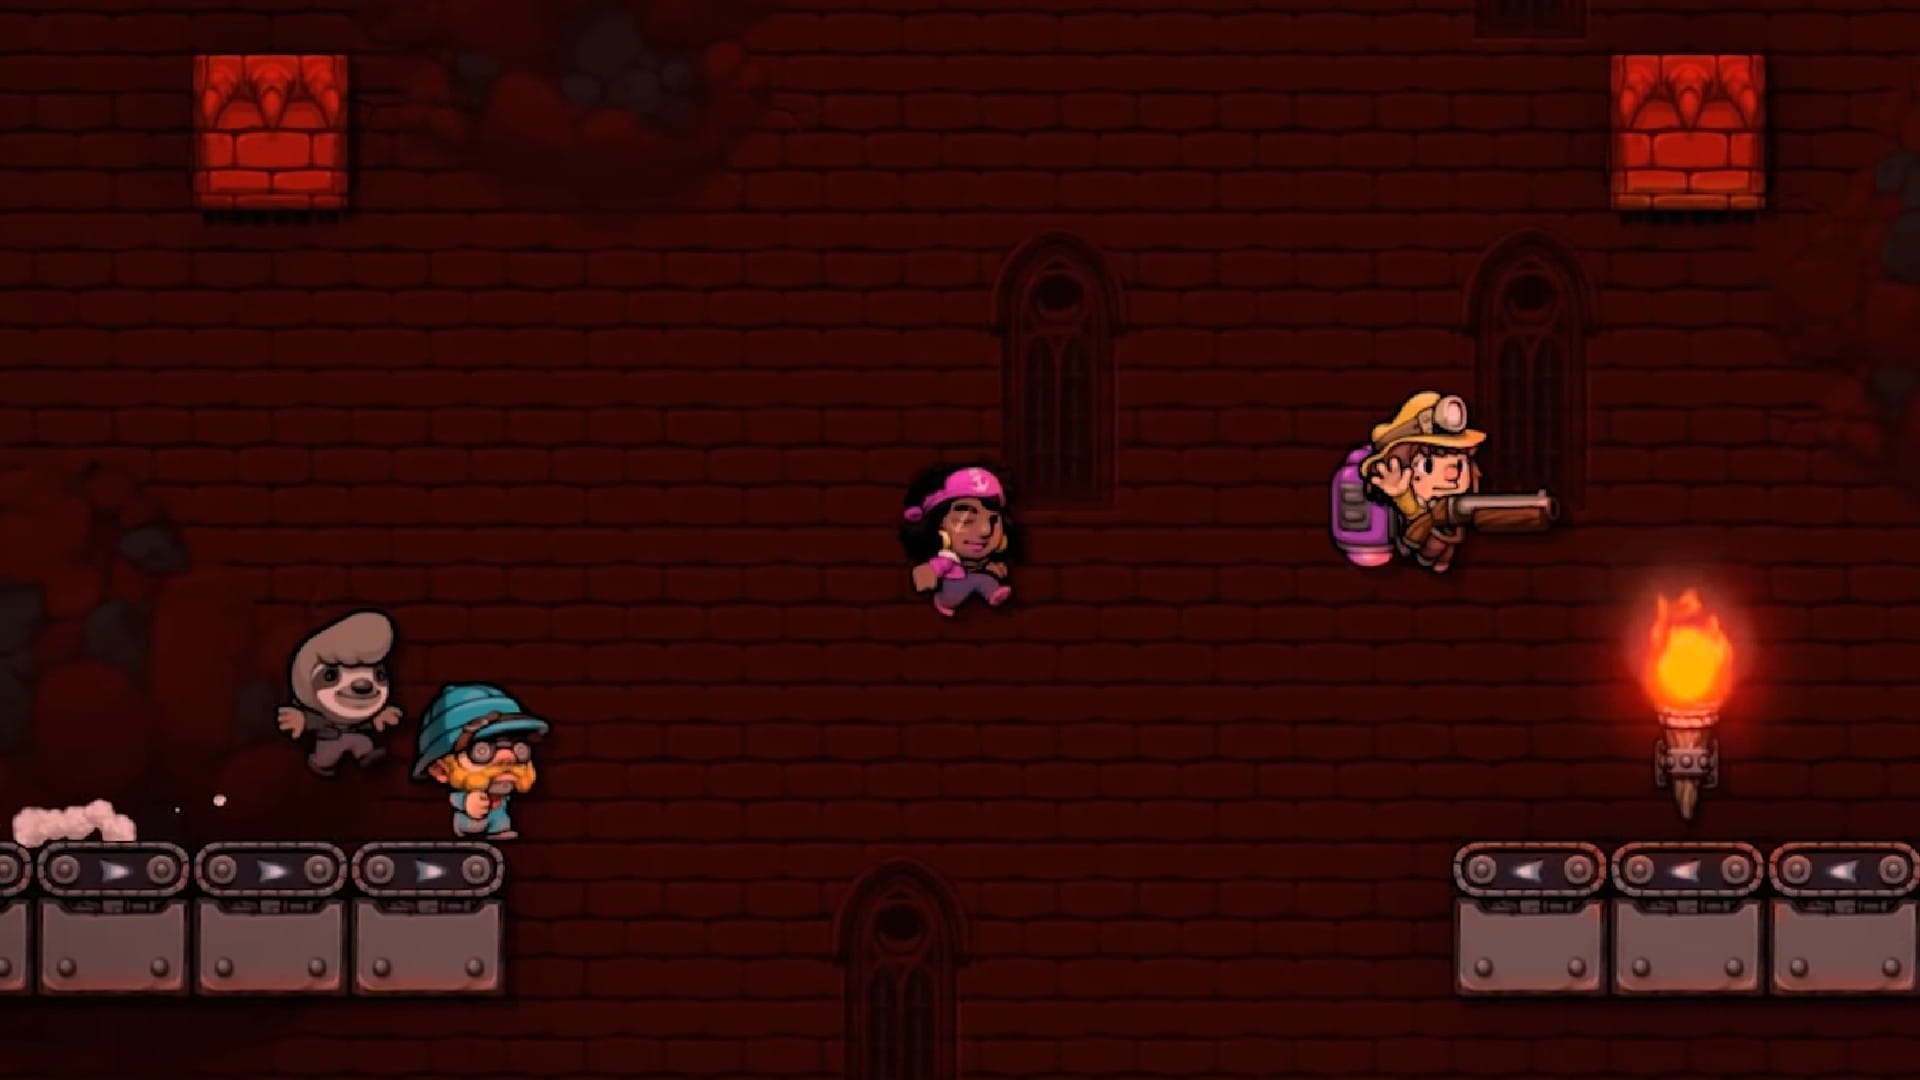 After Long Delay, Spelunky 2 Release Date Targeted for 2020